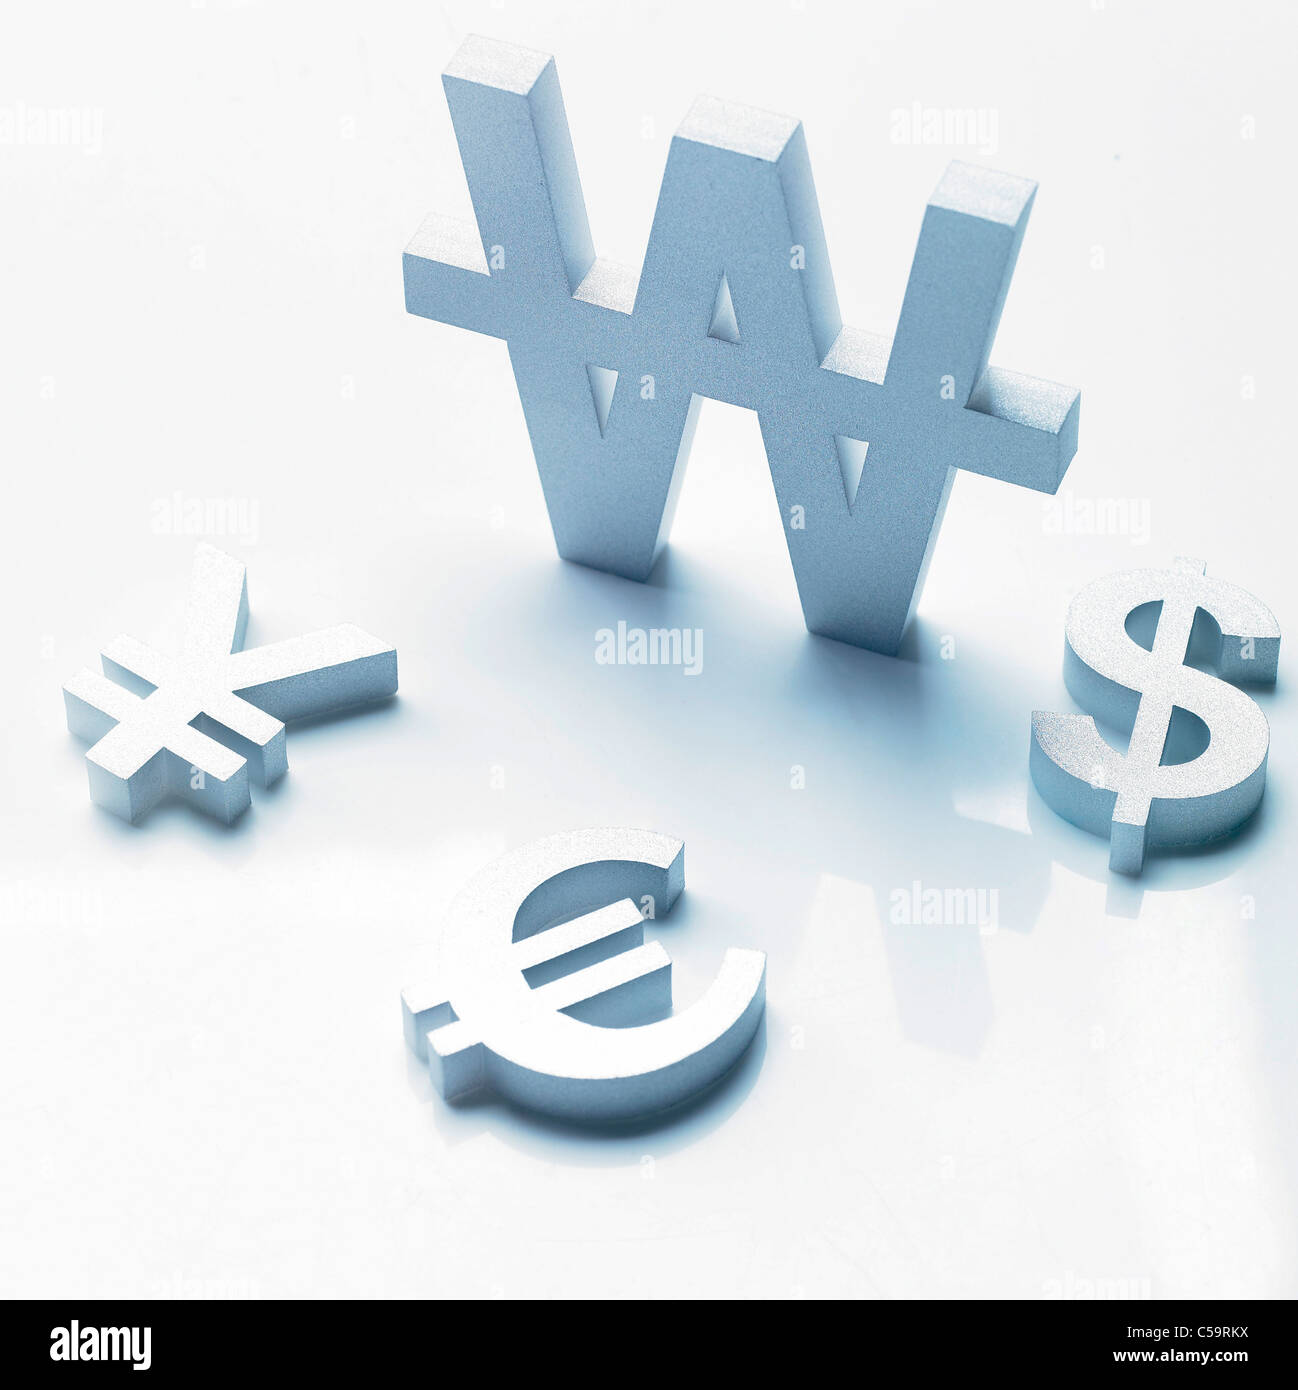 Close-up of Variety of currency symbols Stock Photo